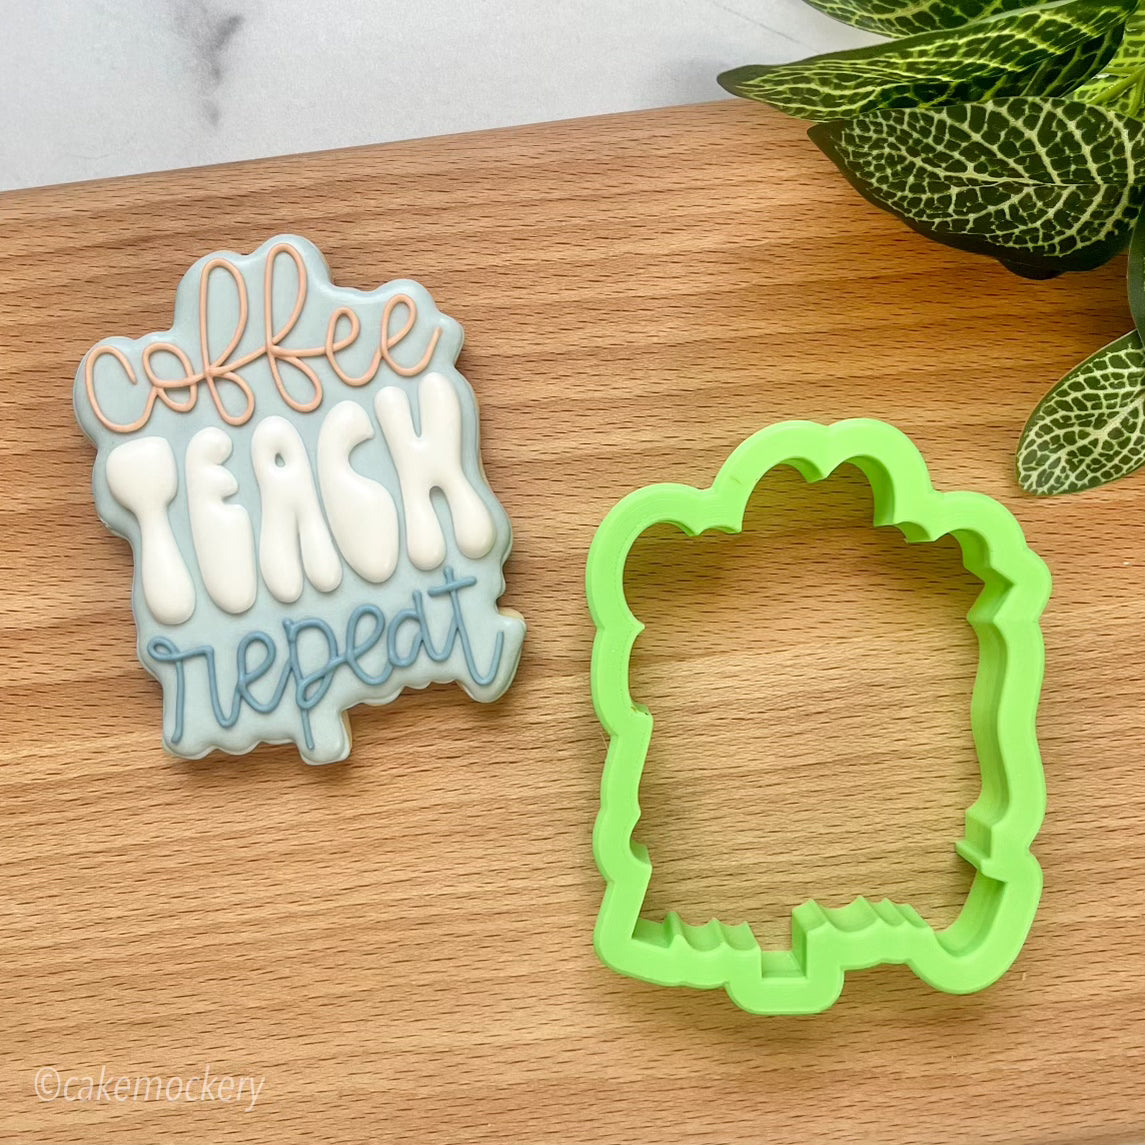 Coffee Teach Repeat Lettering Cookie Cutter